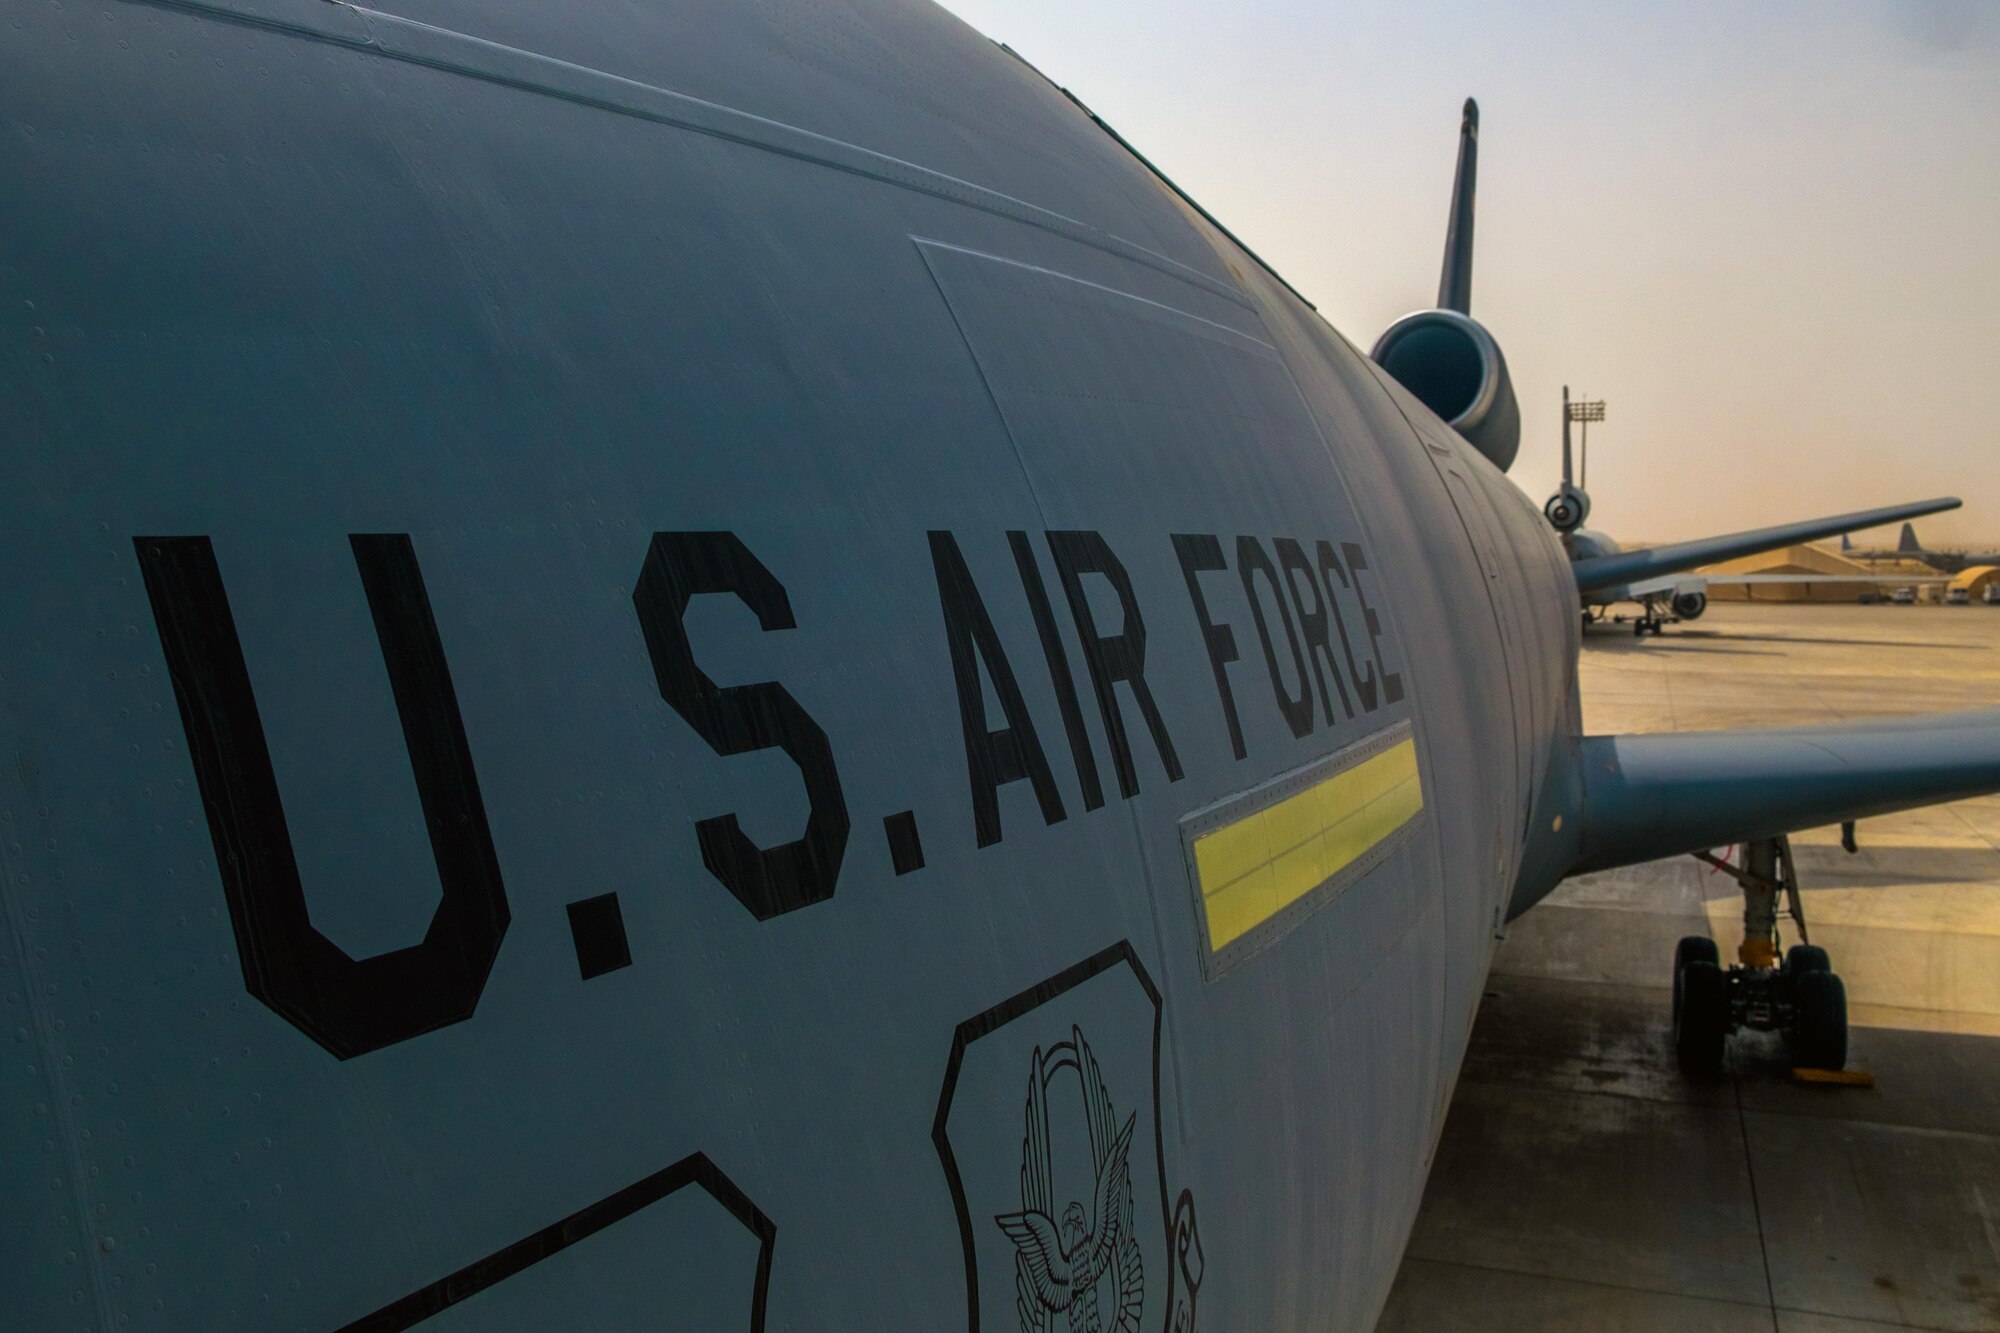 A KC-10 Extender with the 908th Expeditionary Air Refueling Squadron stands ready prior to a sortie July 19, 2017, over an undisclosed location in southwest Asia. As dual-role aircraft capable of receiving or providing in-air refueling and transportation of cargo, KC-10s enable 908 EARS Airmen with unique versatility. (U.S. Air Force photo by Senior Airman Preston Webb)